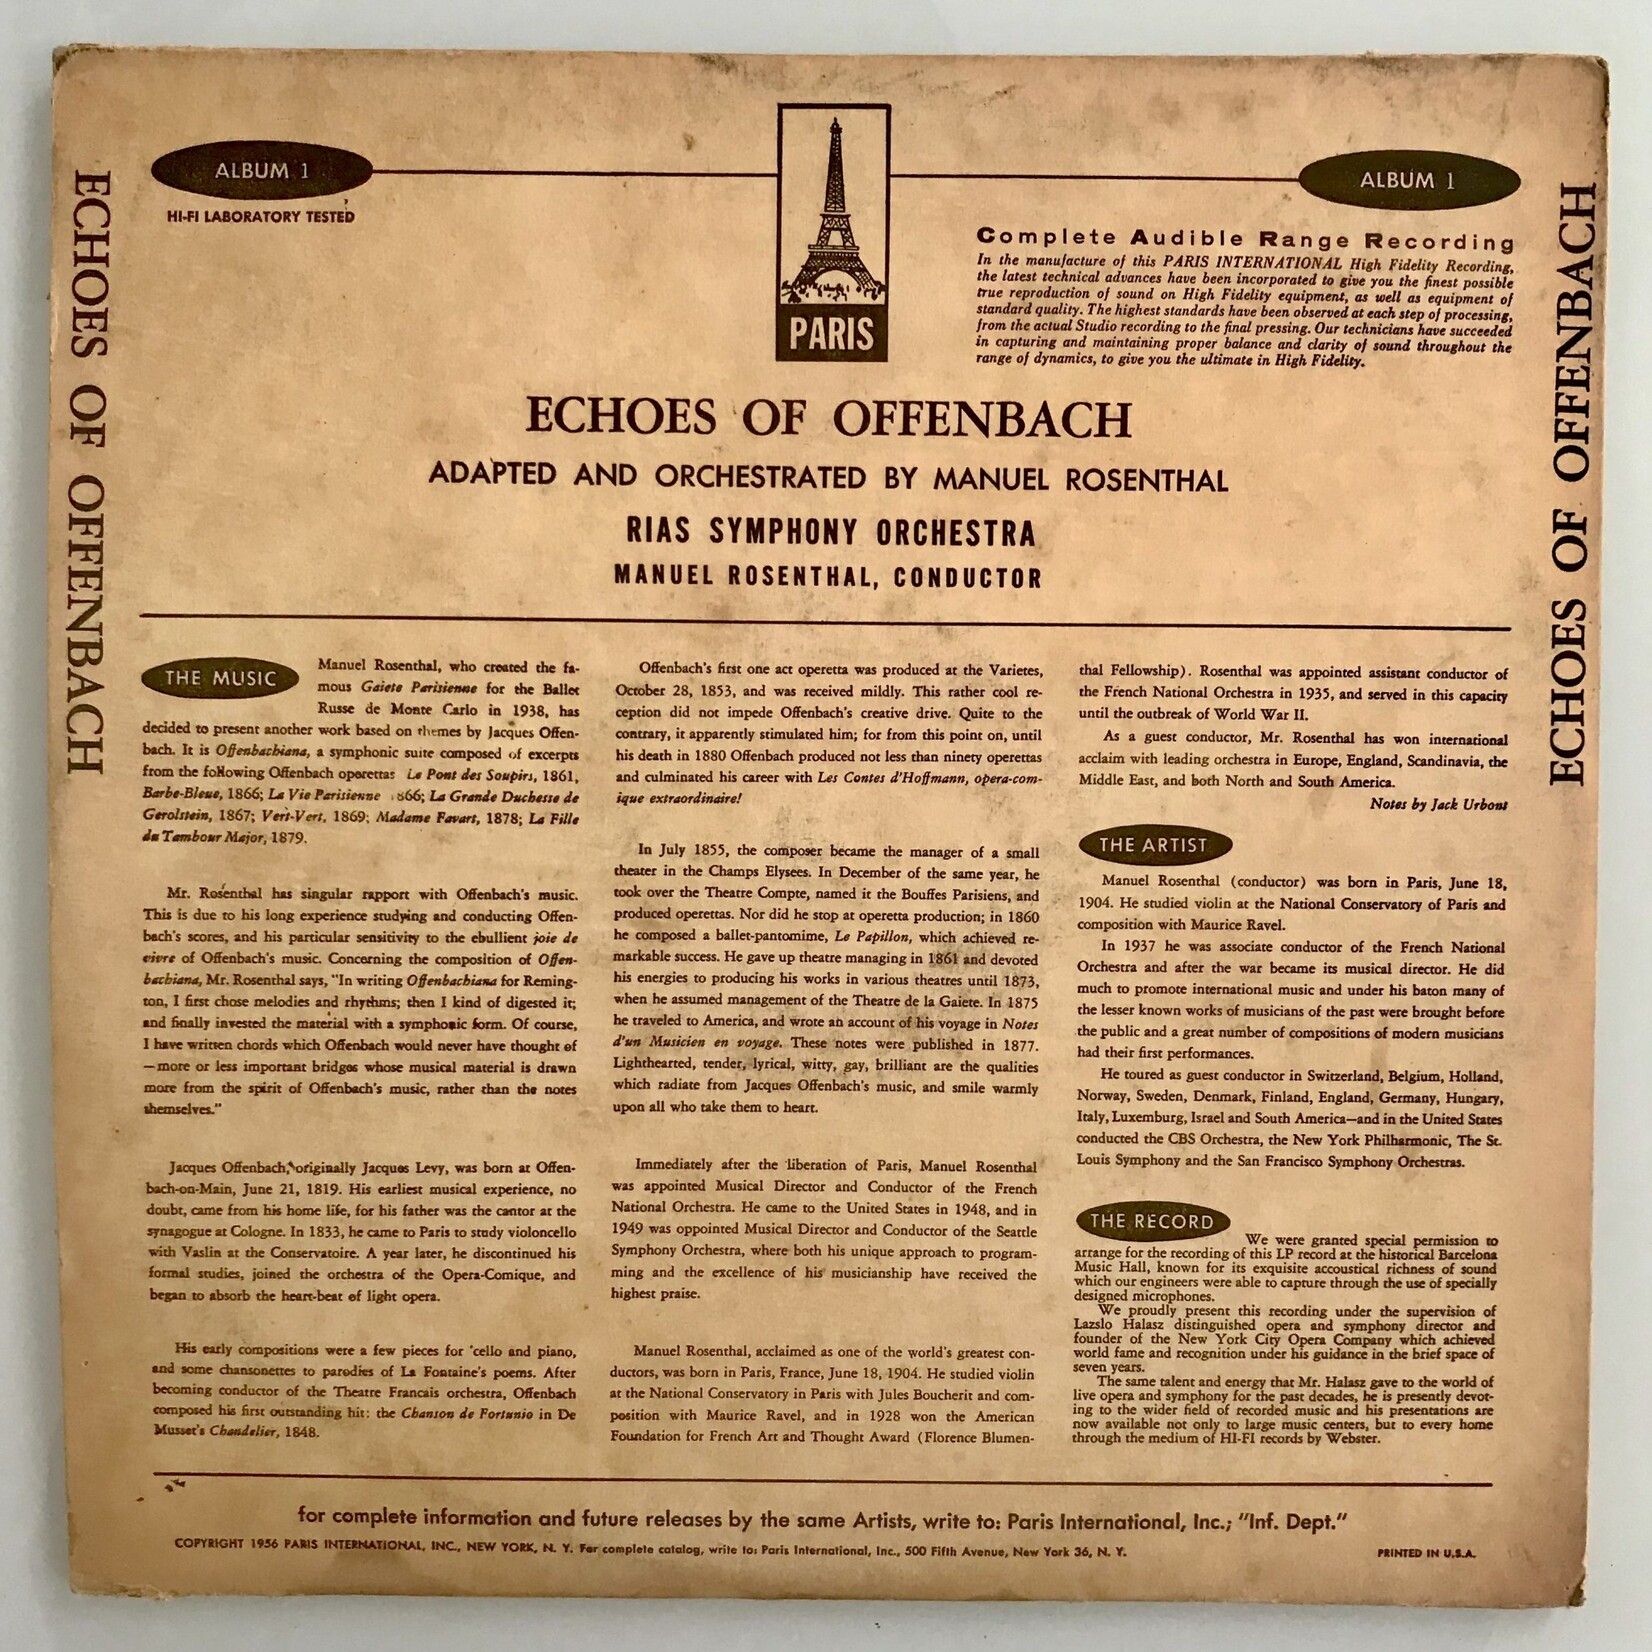 Rias Syphony Orchestra - Echoes Of Offenbach - Vinyl LP (USED)